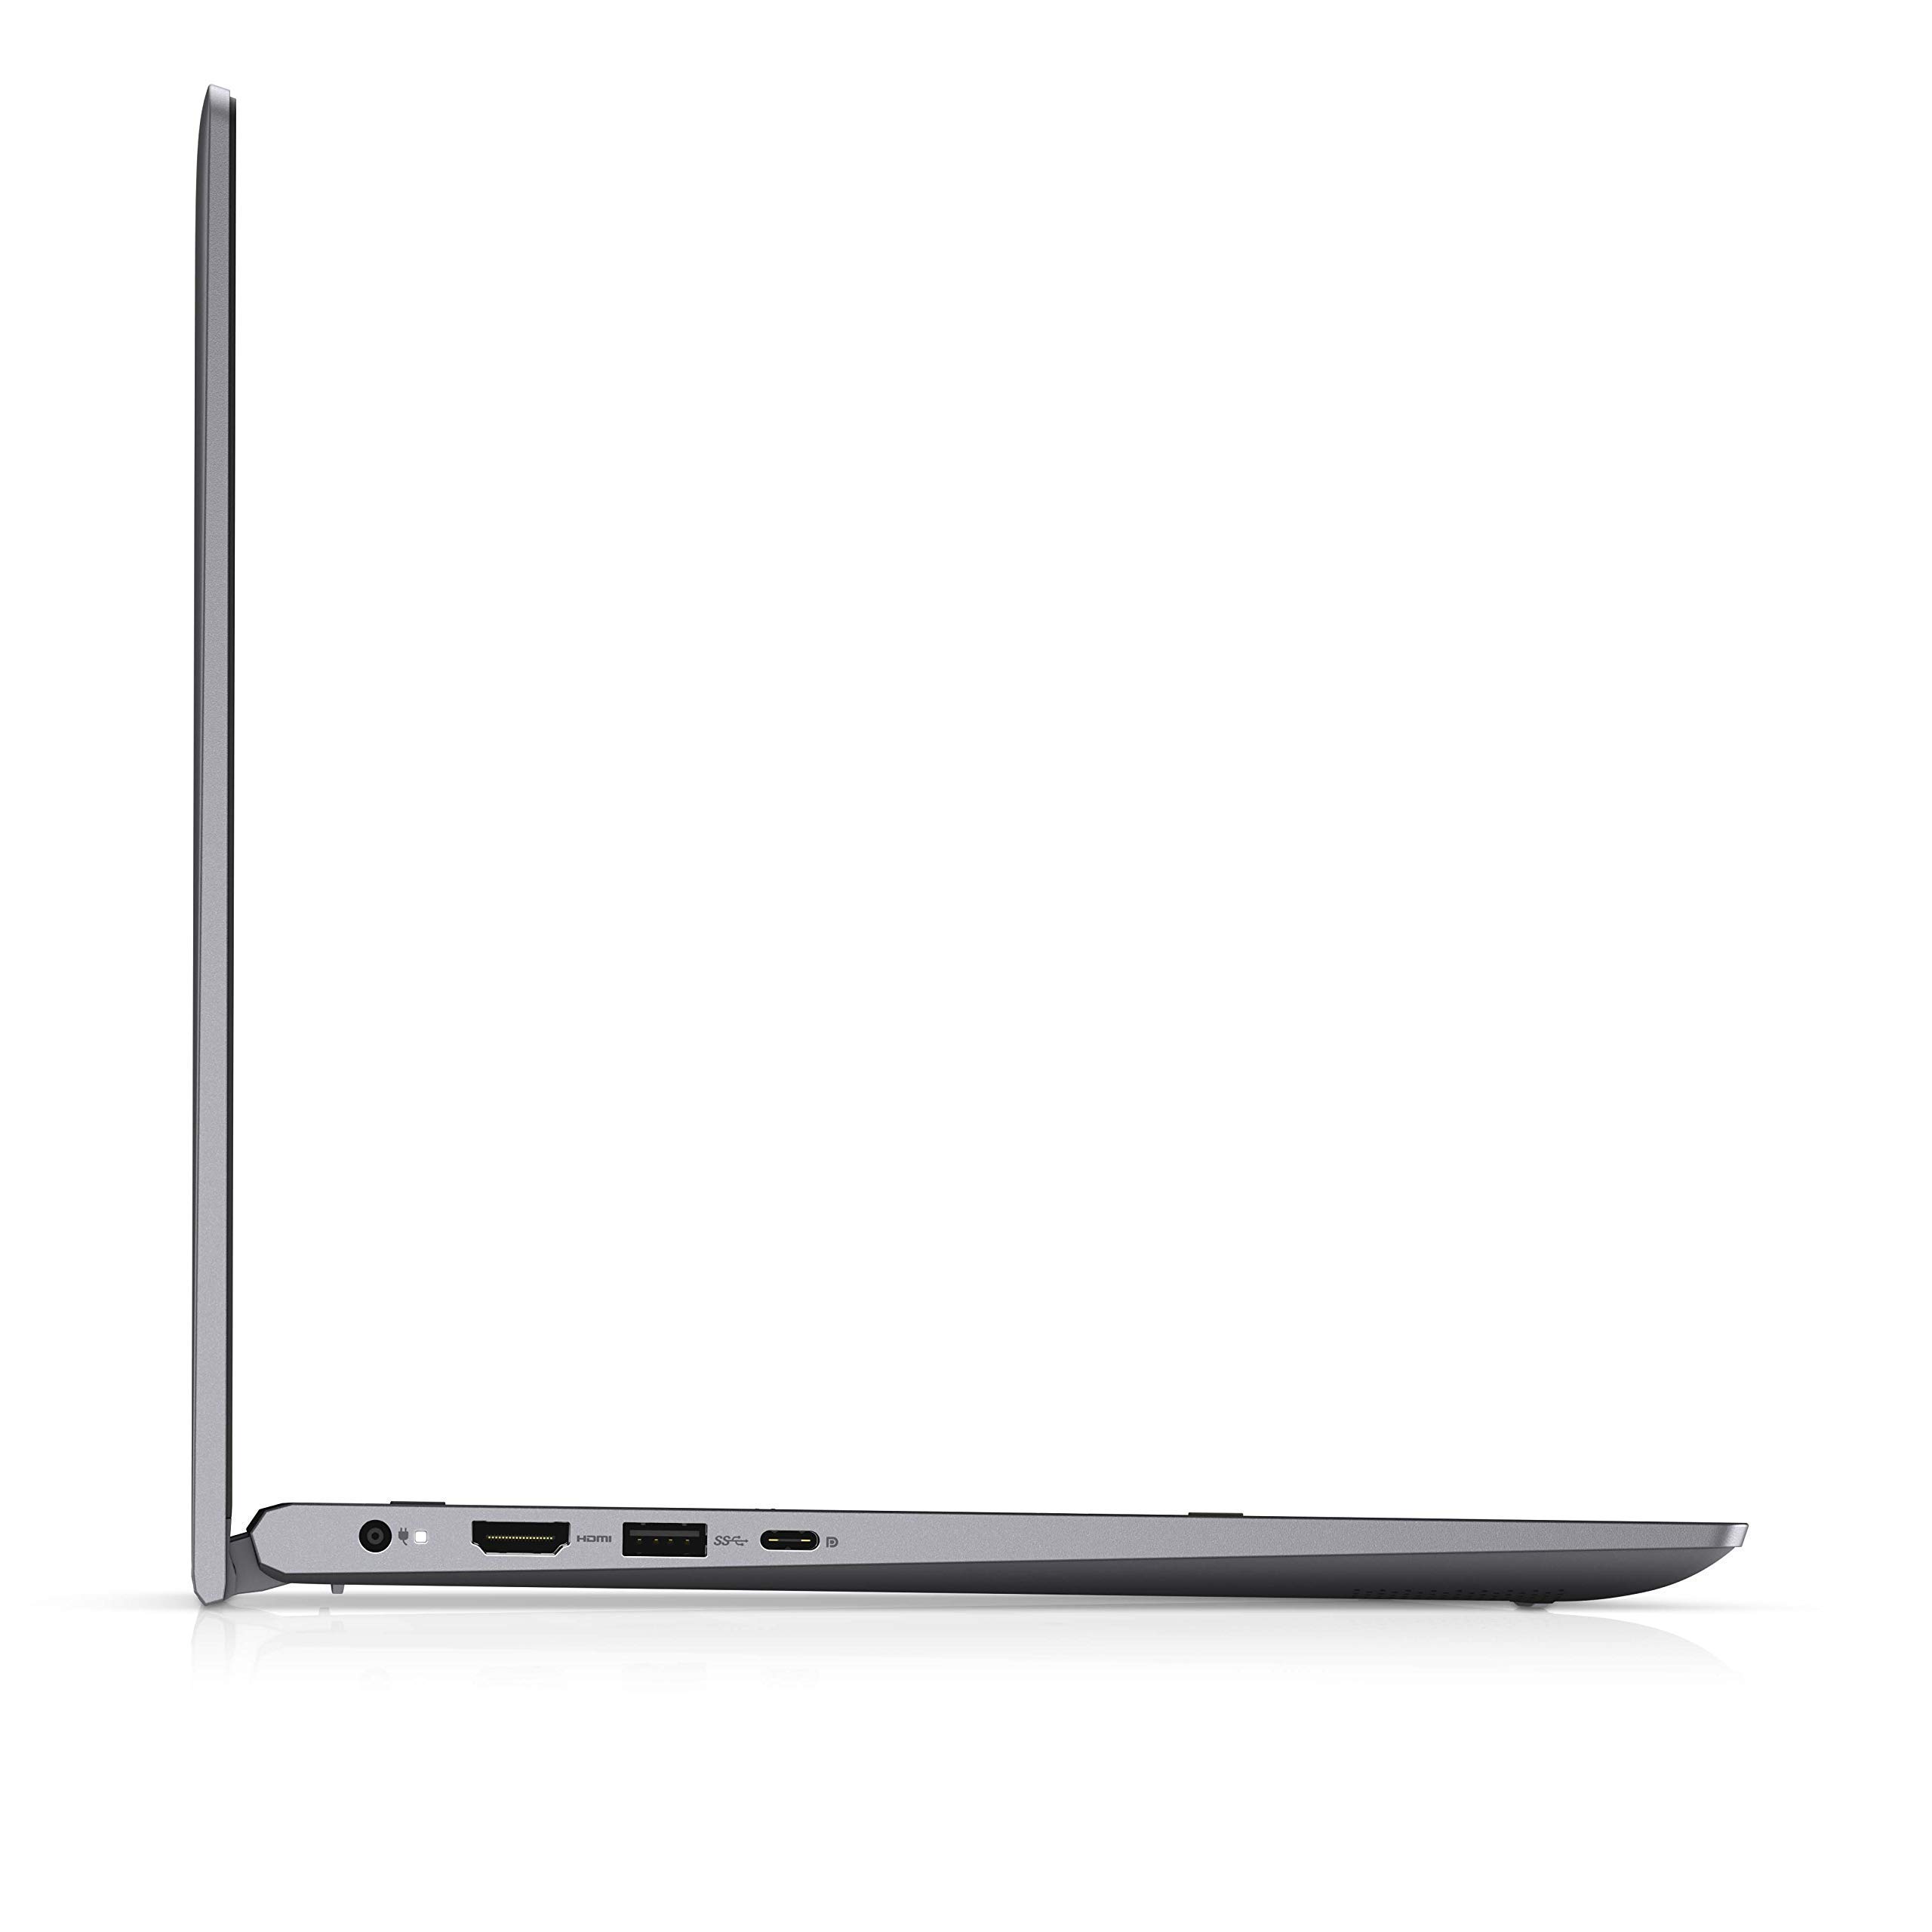 Flagship Dell Inspiron 14 5000 2 in 1 Laptop 14